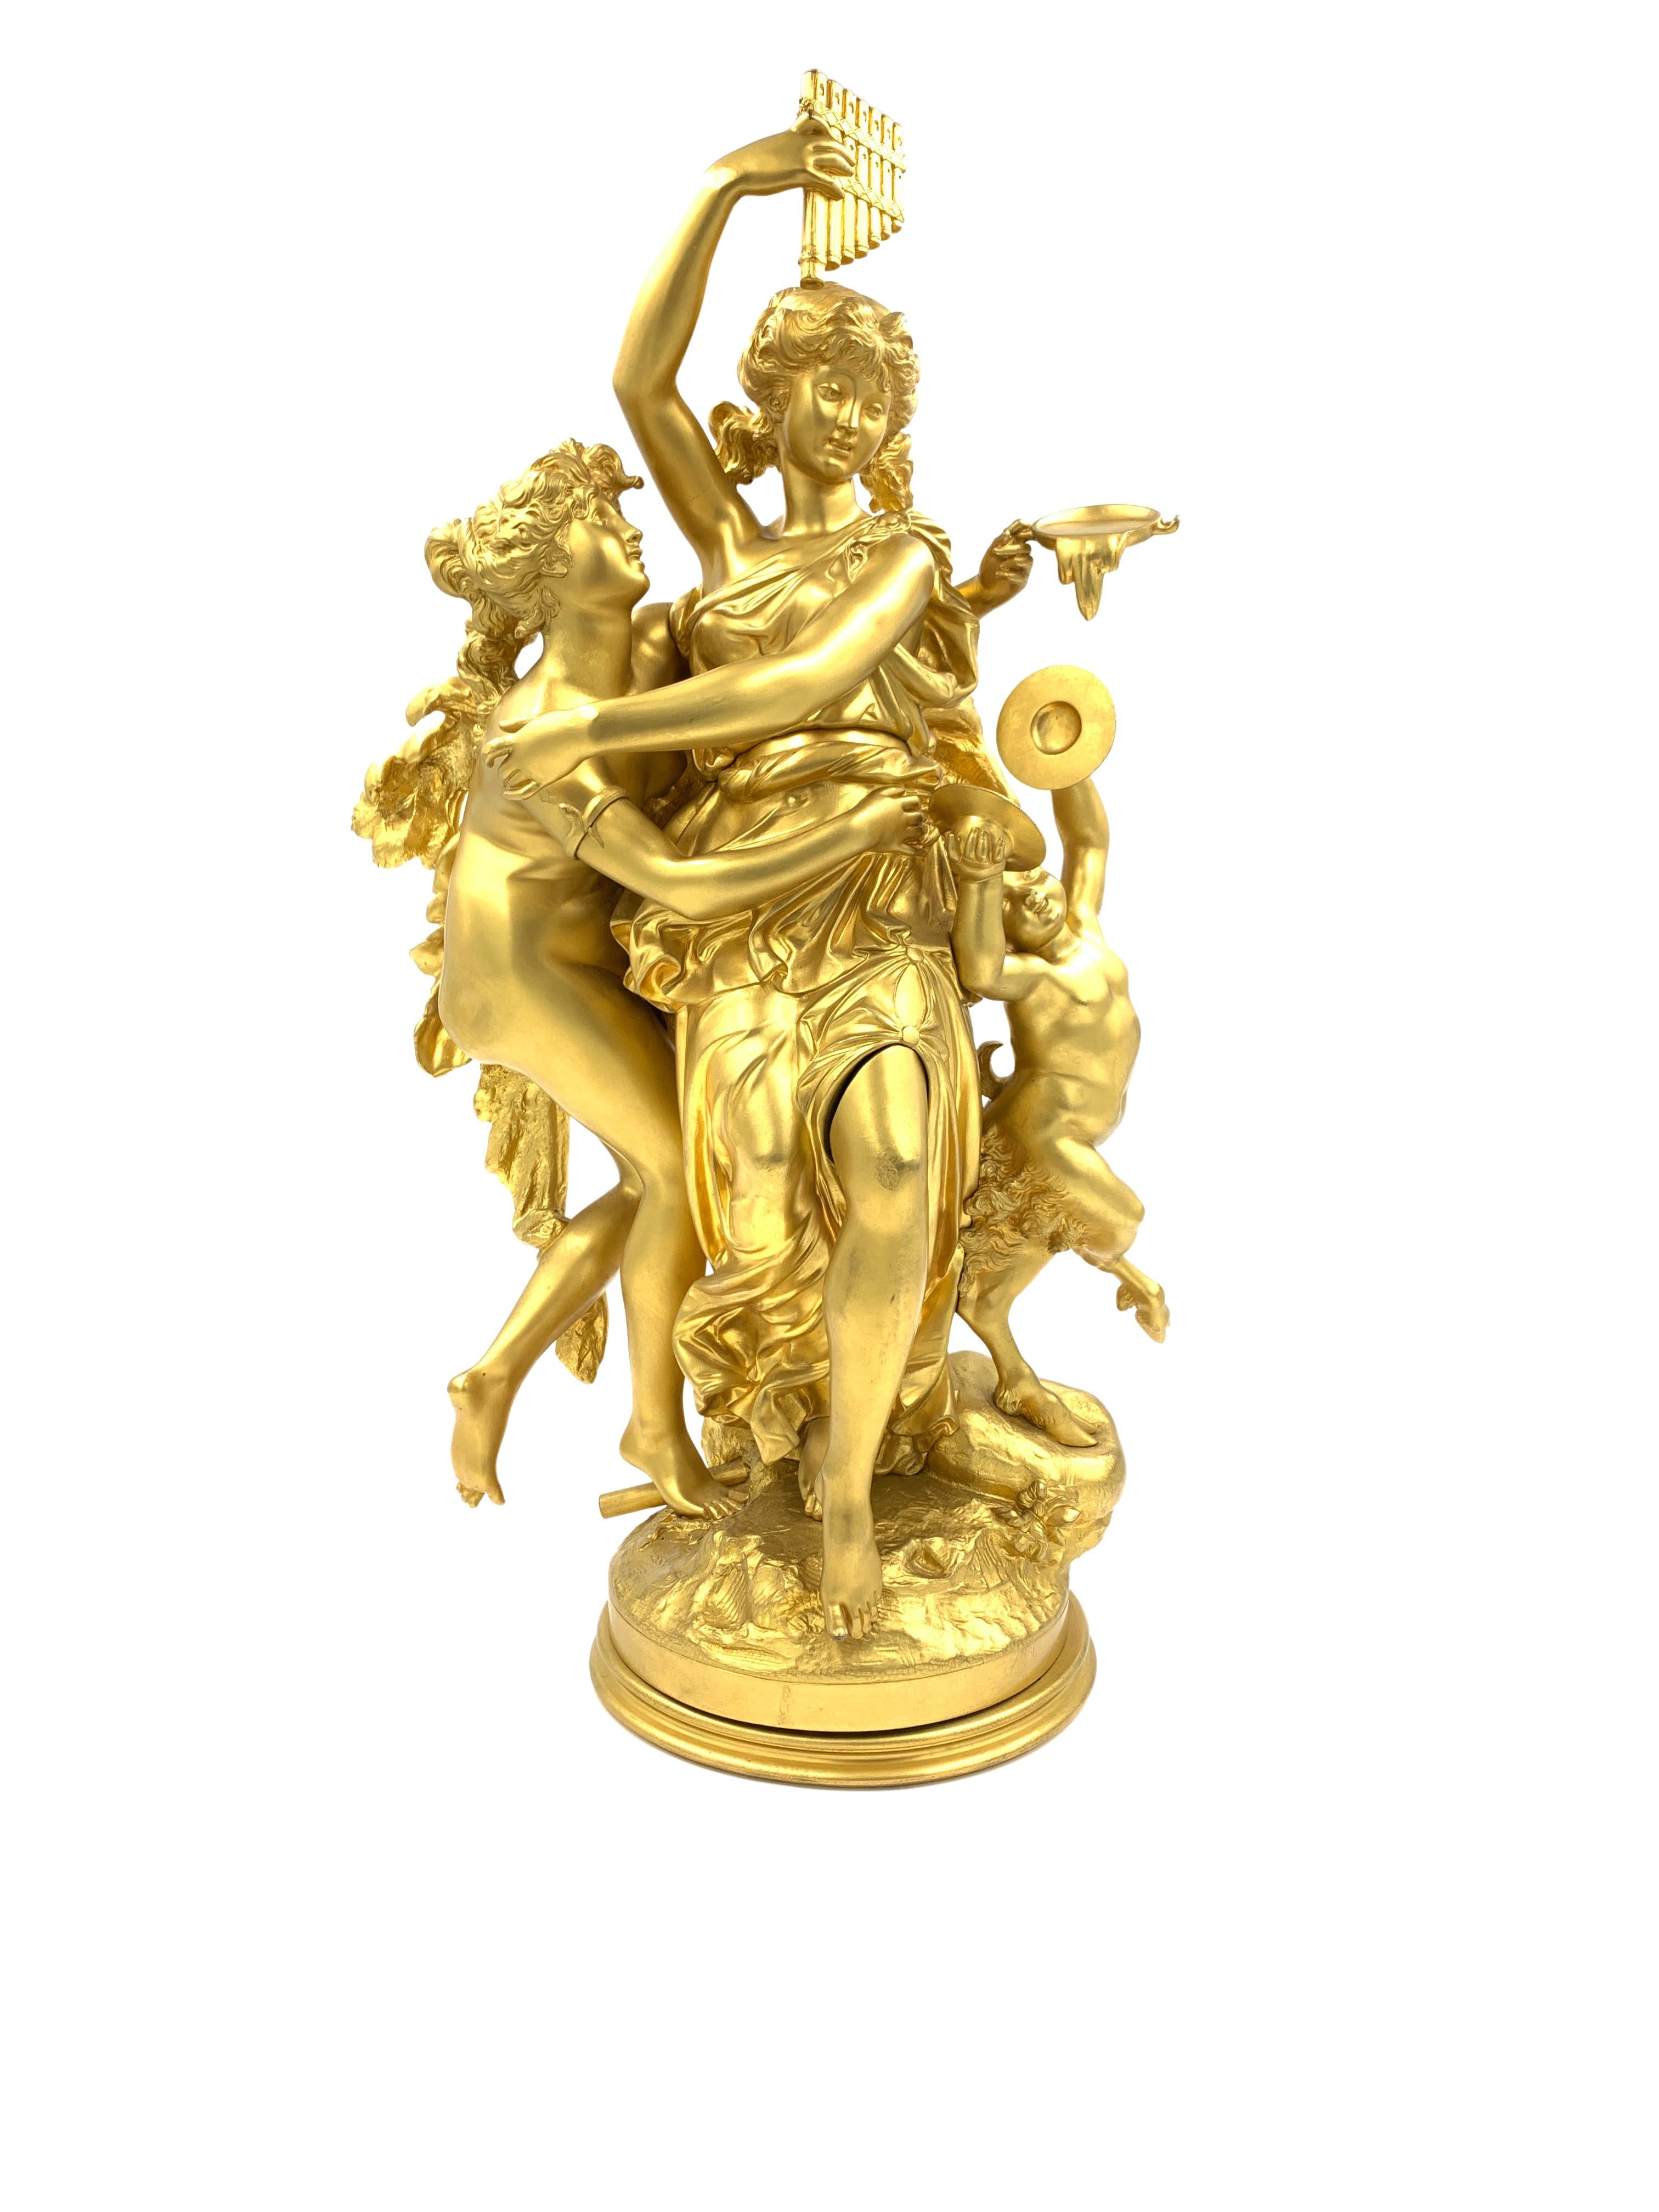 A French gilt bronze Bacchic figural group, late 19th century, with two dancing nymphs and a satyr, with impressed mark for Jules Graux Foundry to the socle, presented on a later fluted variegated grey and white marble column. 

Measures: H: